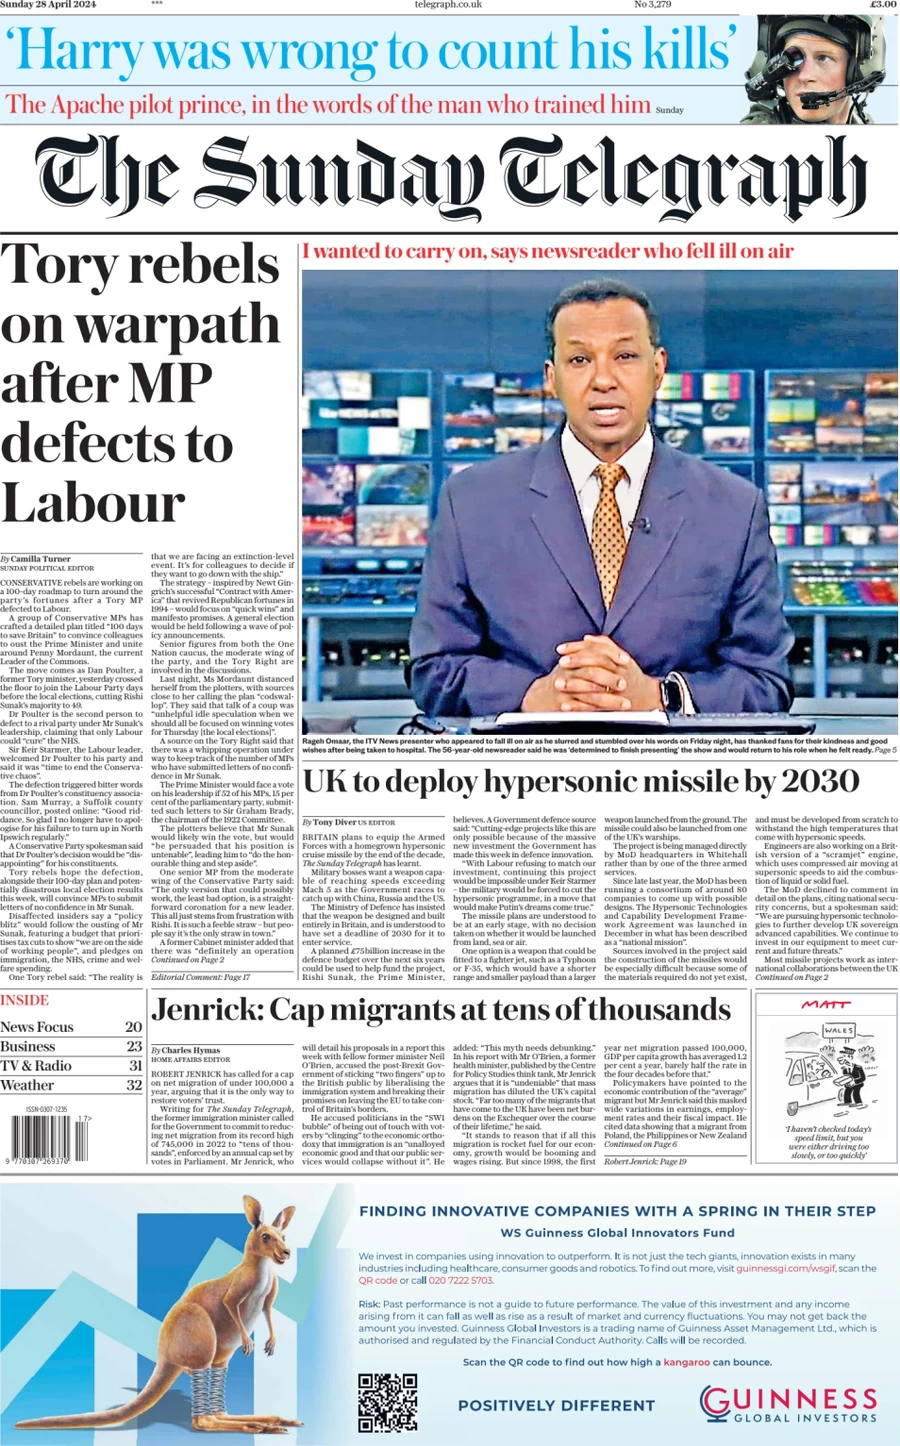 The Sunday Telegraph - Tory rebels on warpath after MP defects to Labour 